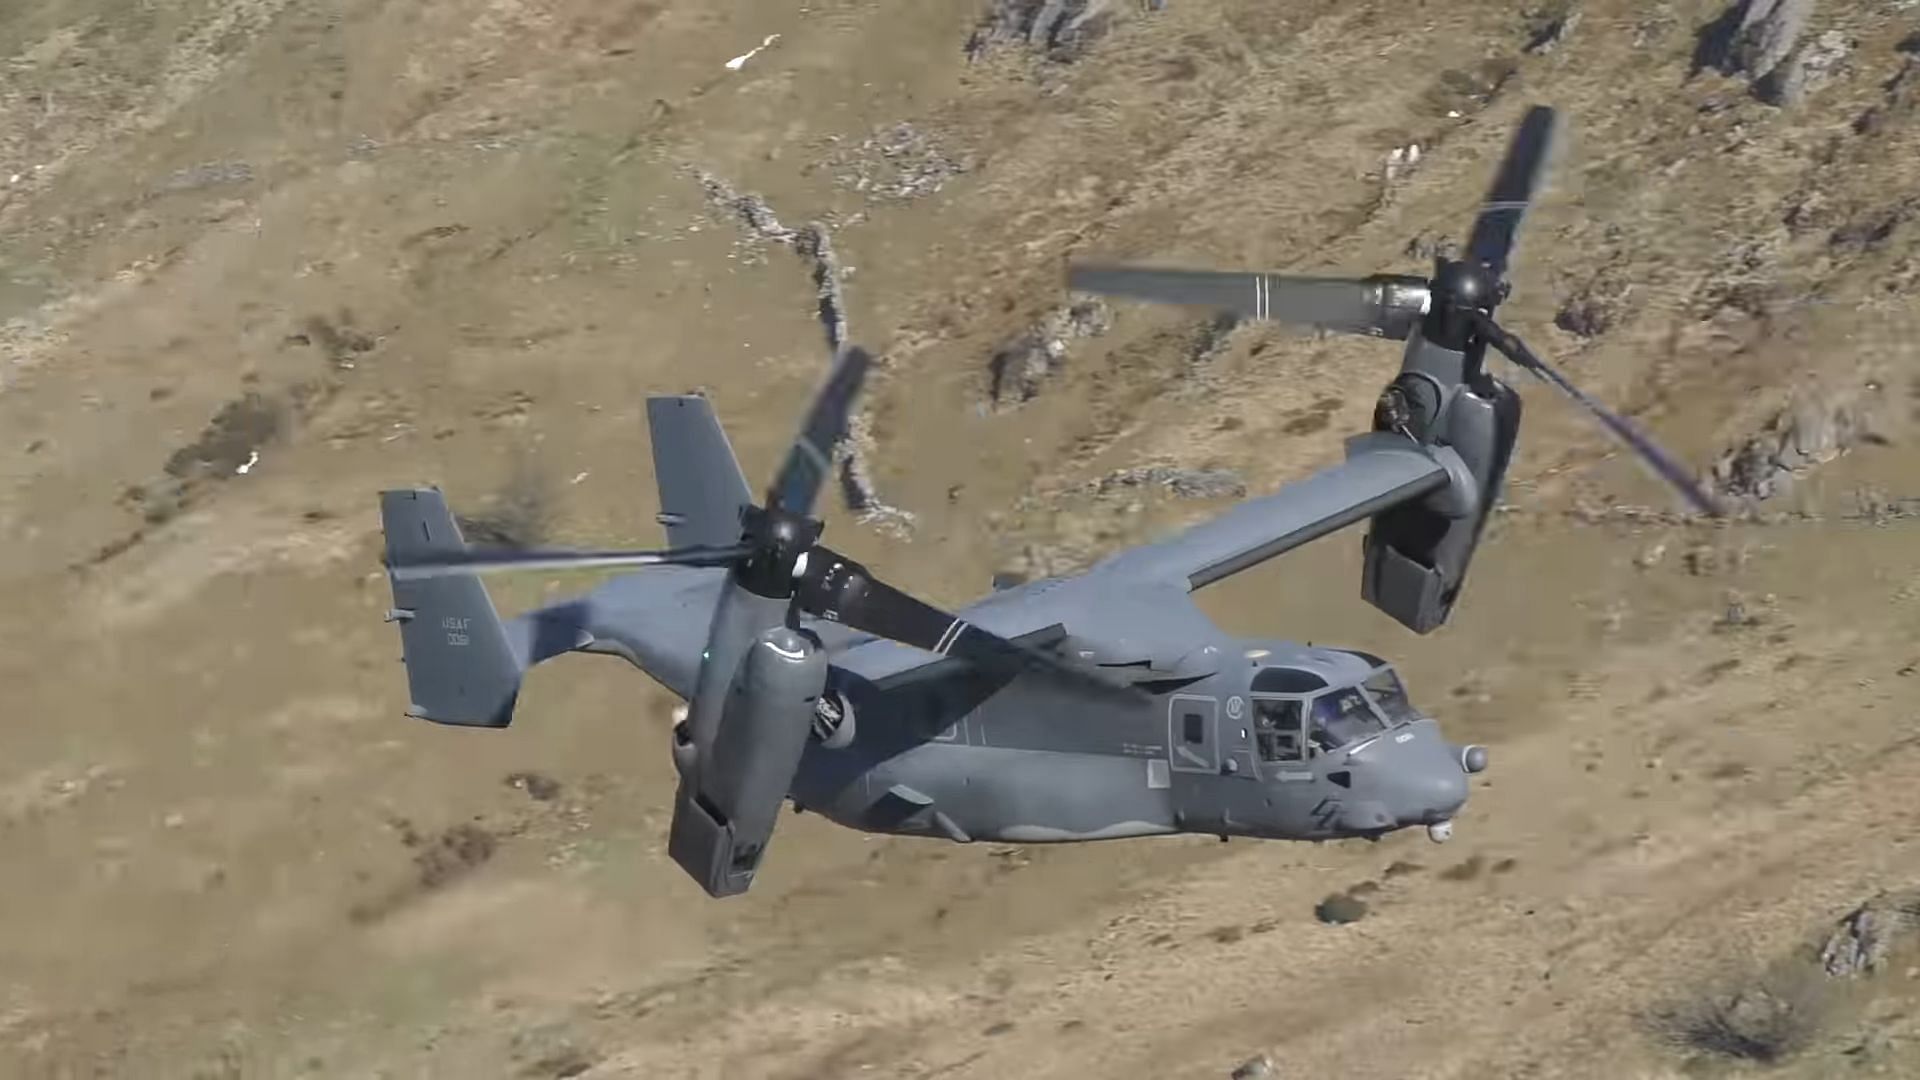 U.S. military aircraft, V-22 Osprey crashes off the cast of Japan; One person confirmed dead (Image via YouTube/Dafydd Phillips)